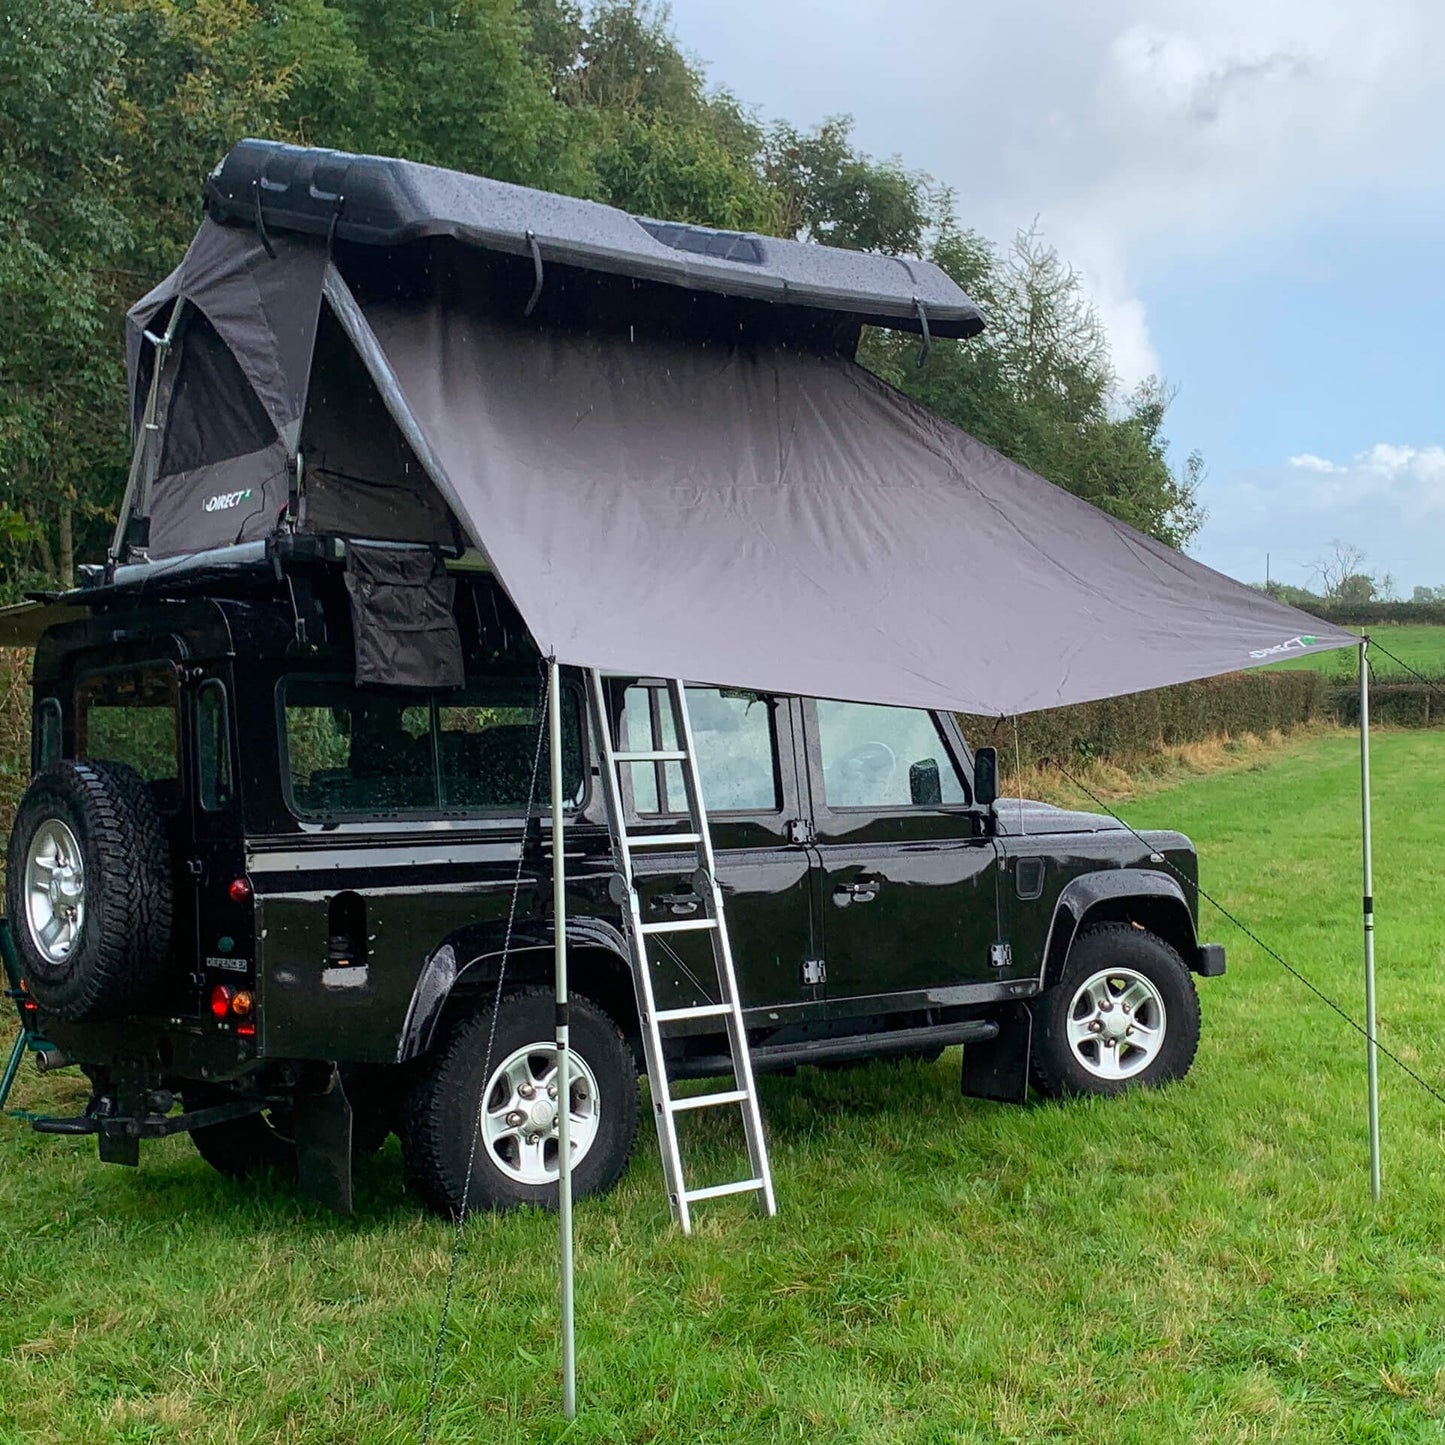 Granite Grey Sun Shade Awning Canopy for Direct4x4 Pathseeker Roof Top Tent -  - sold by Direct4x4